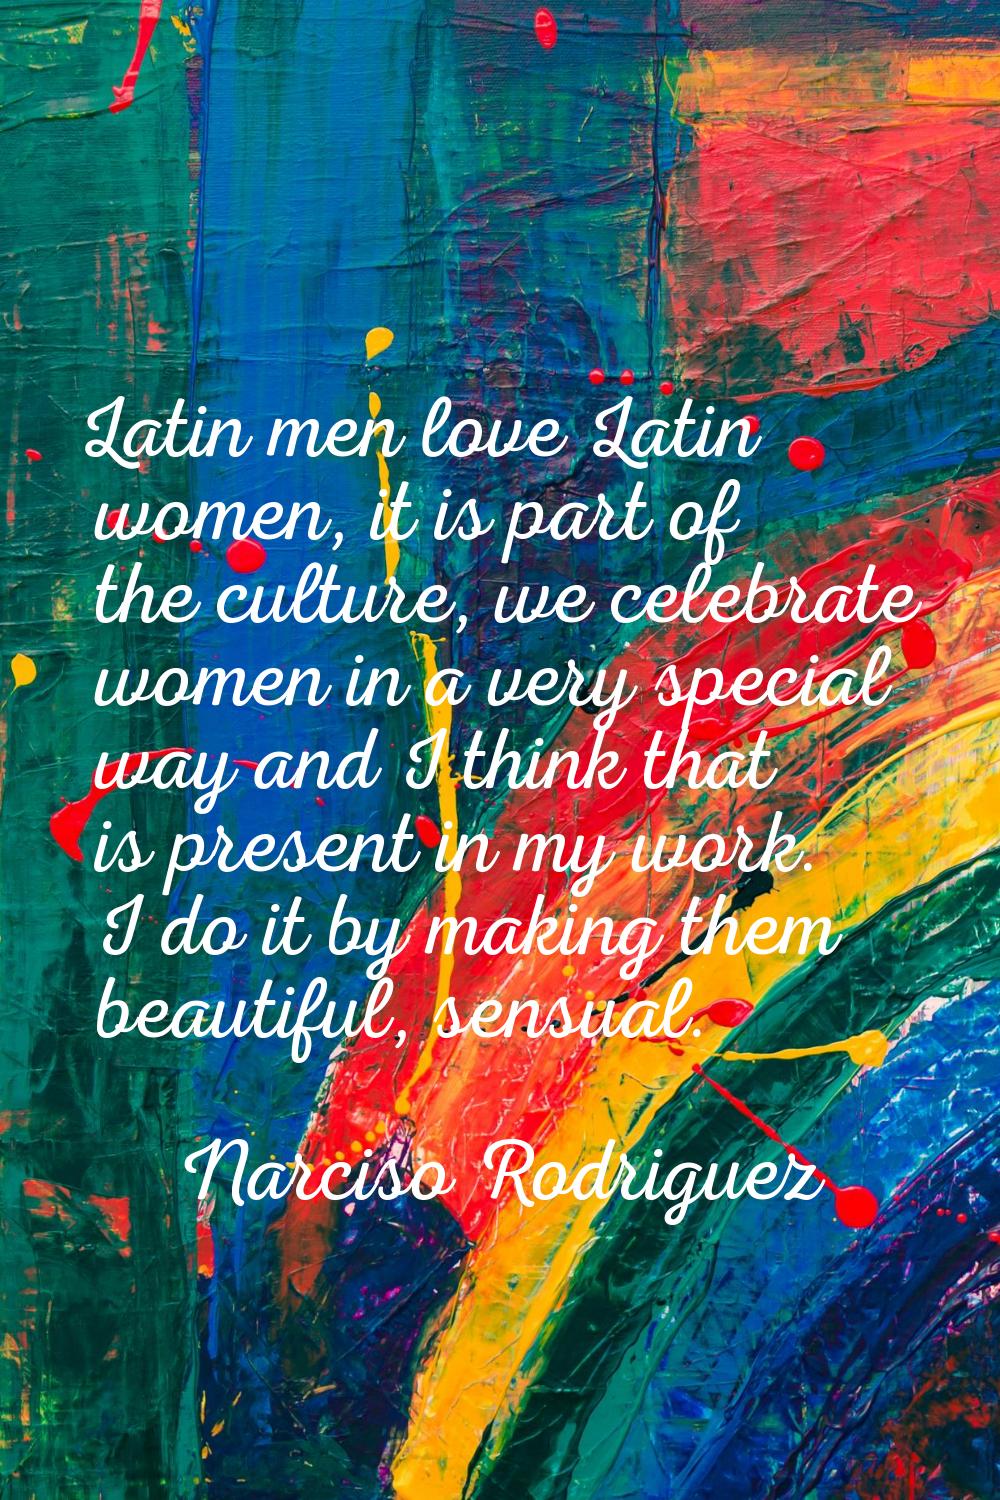 Latin men love Latin women, it is part of the culture, we celebrate women in a very special way and